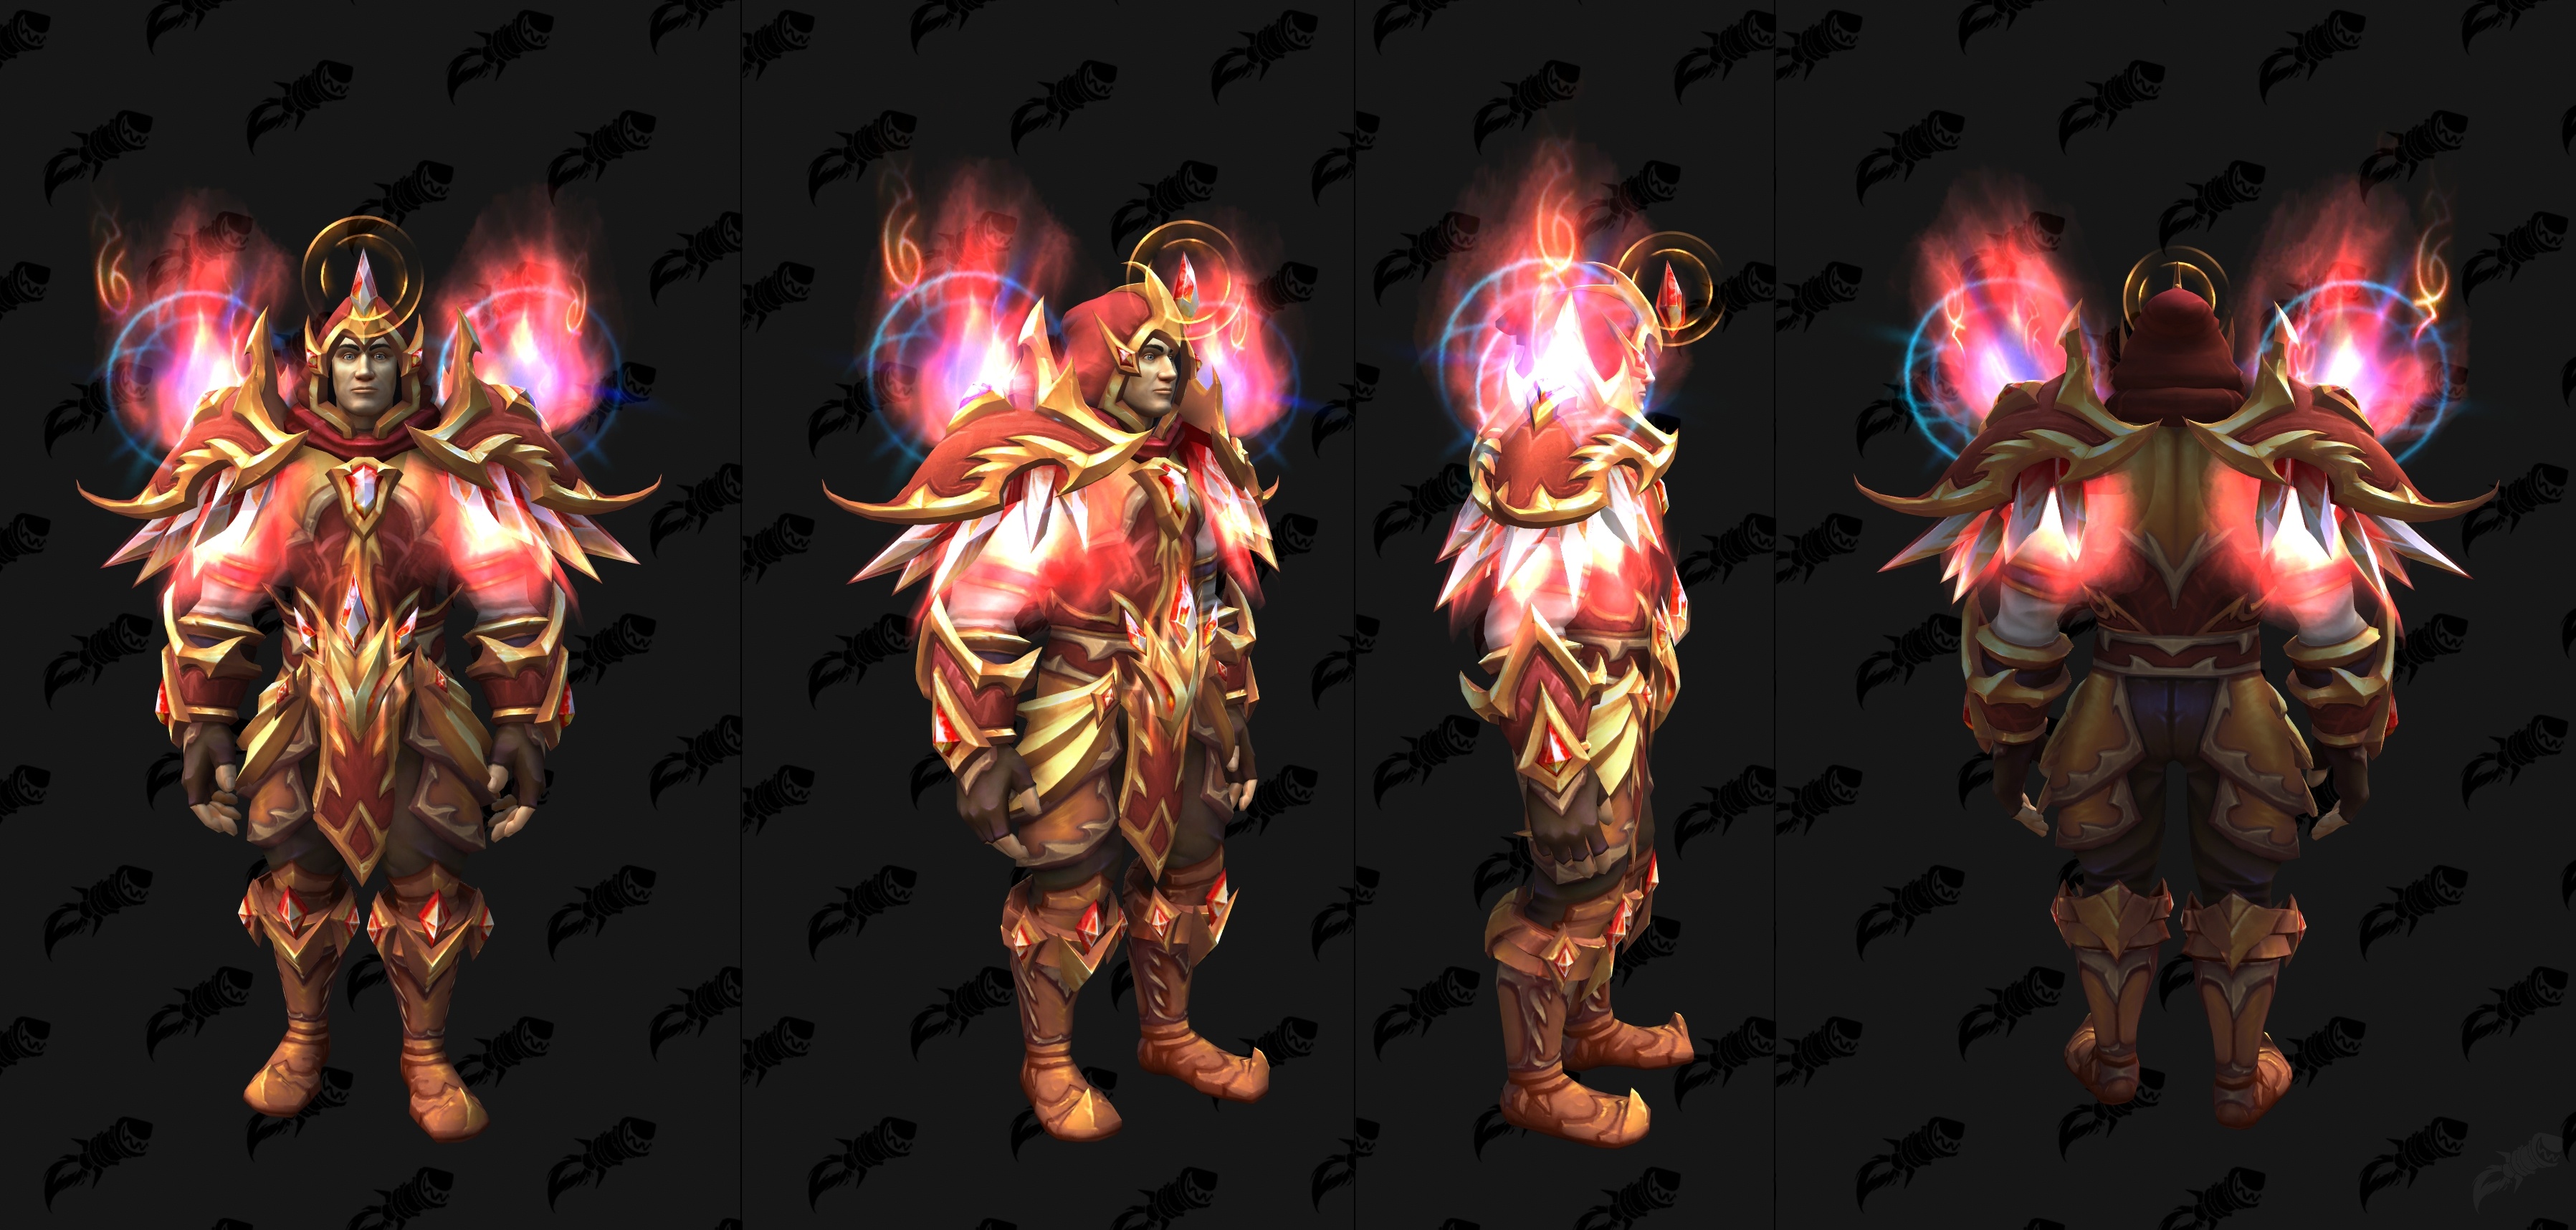  Ideal Death Protection sets for PVP (mages): Set